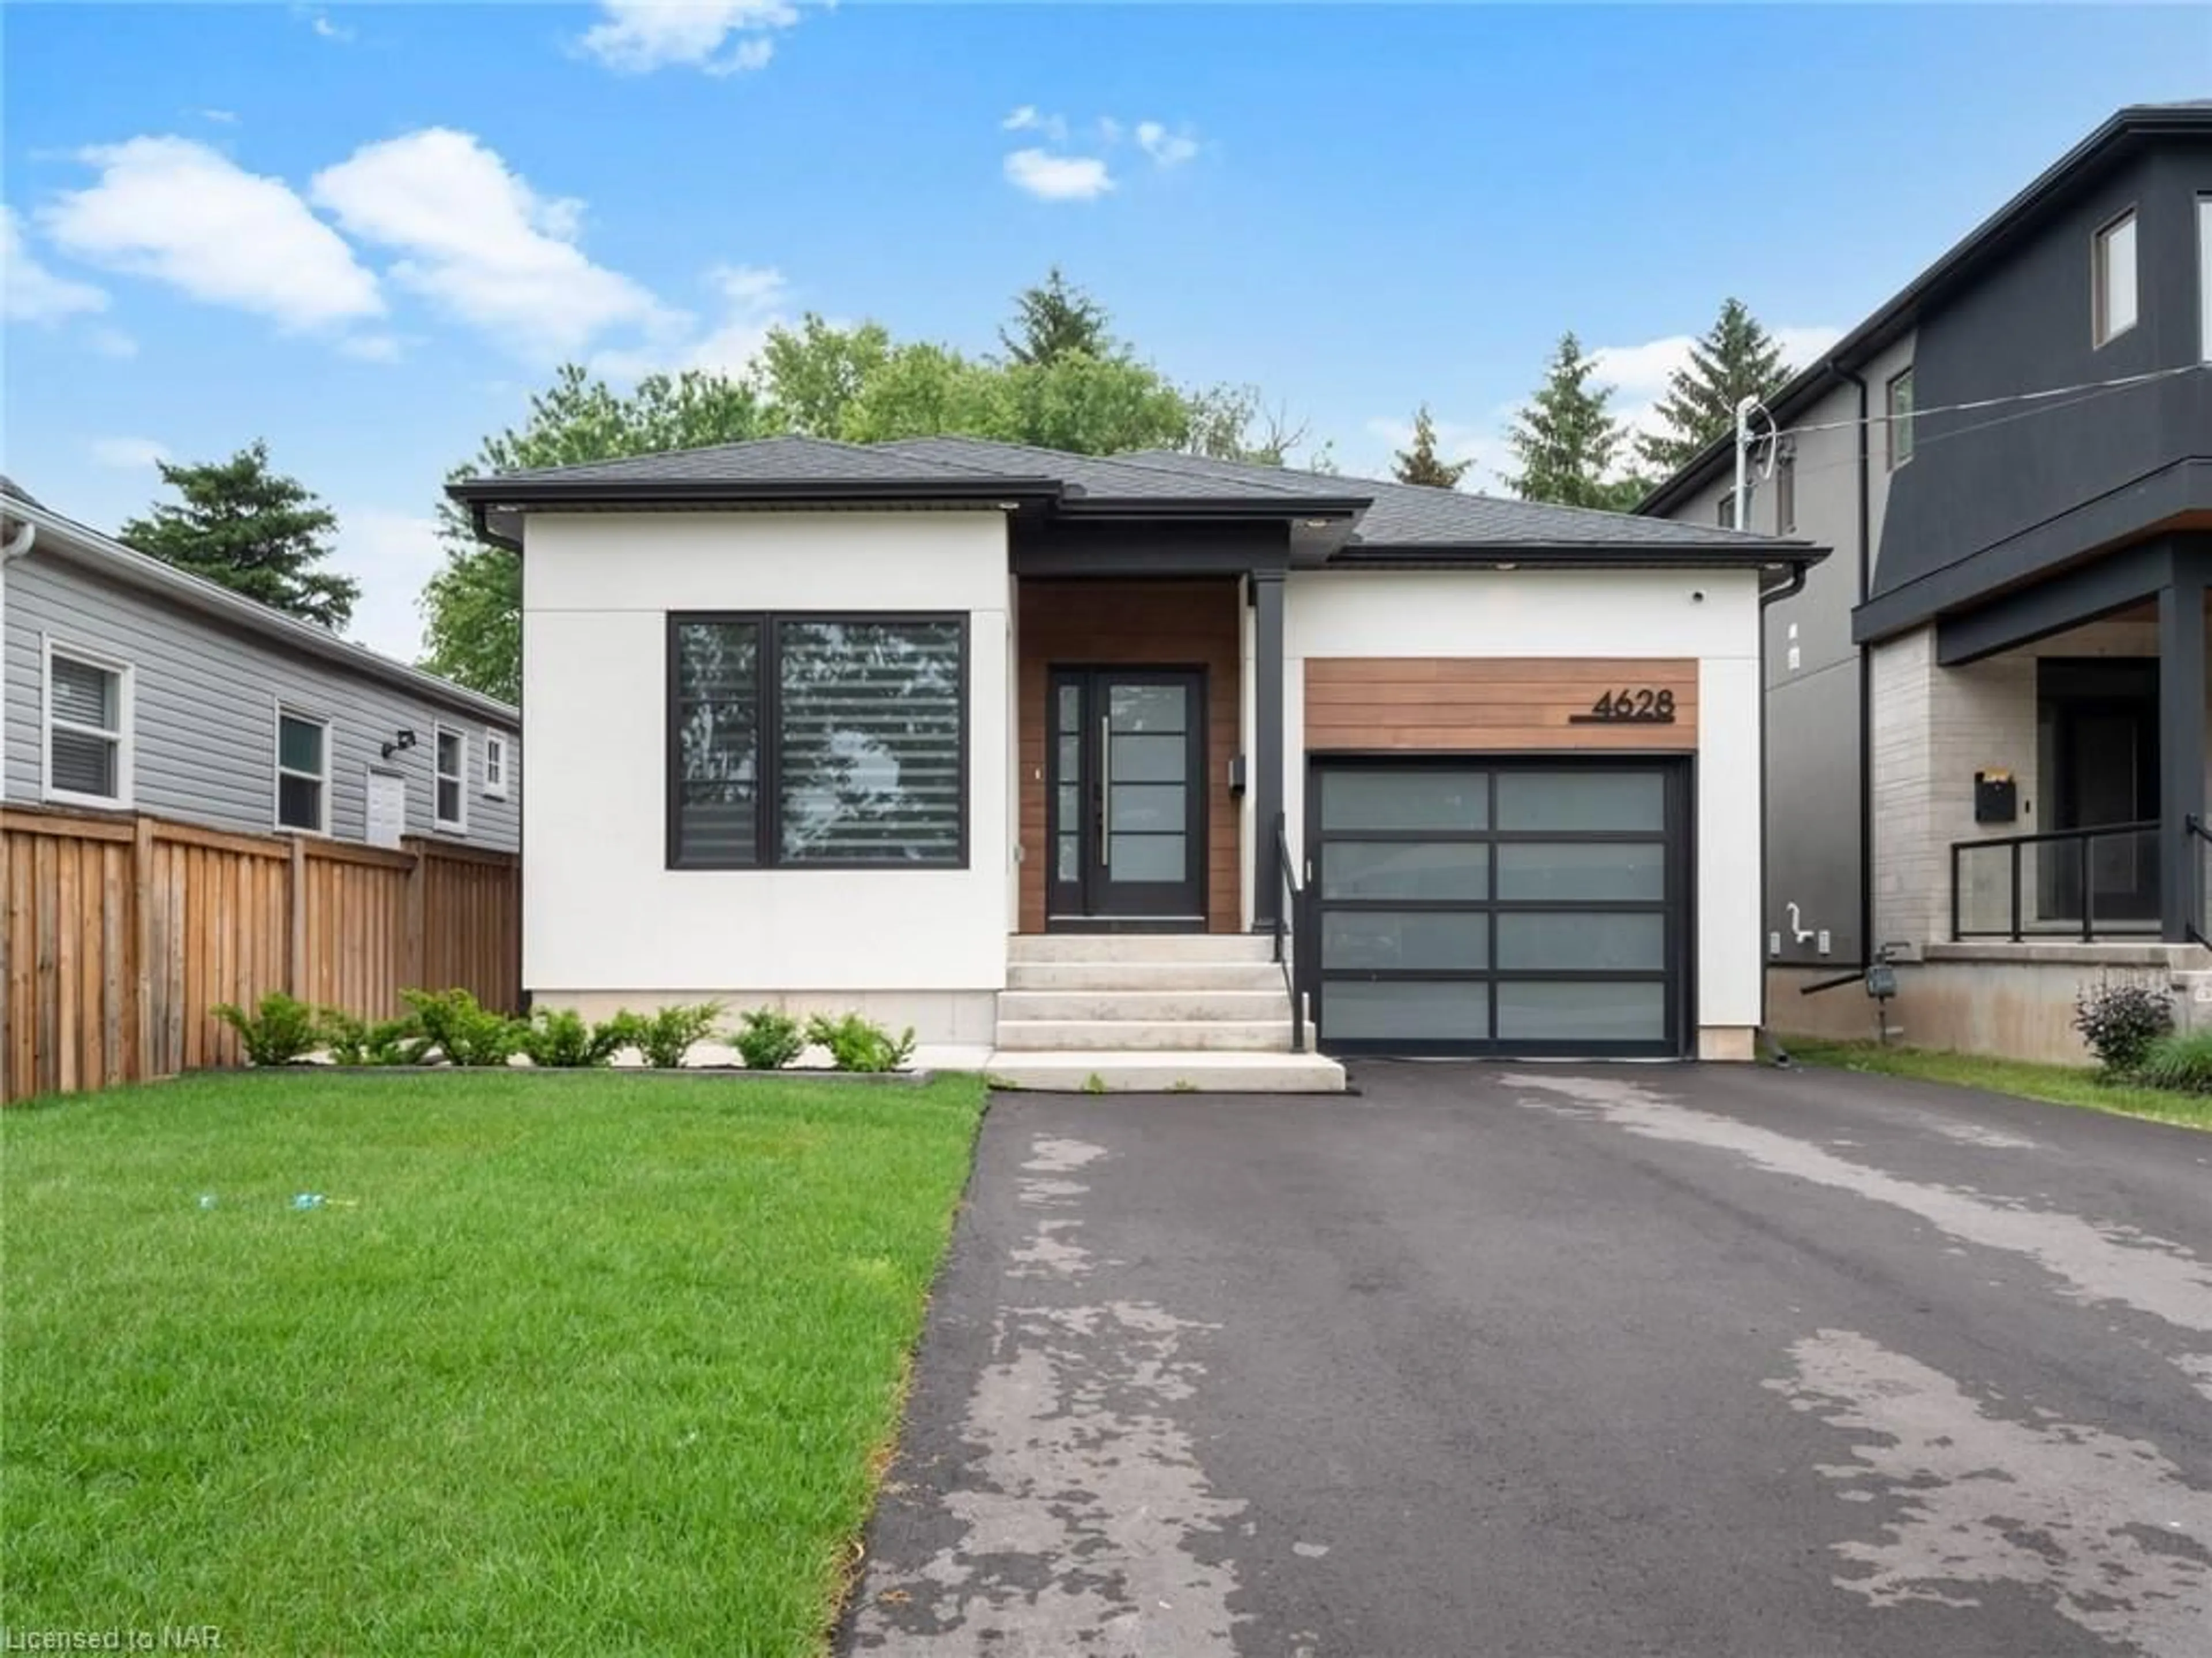 Frontside or backside of a home for 4628 Lee Ave, Niagara Falls Ontario L2H 1M6